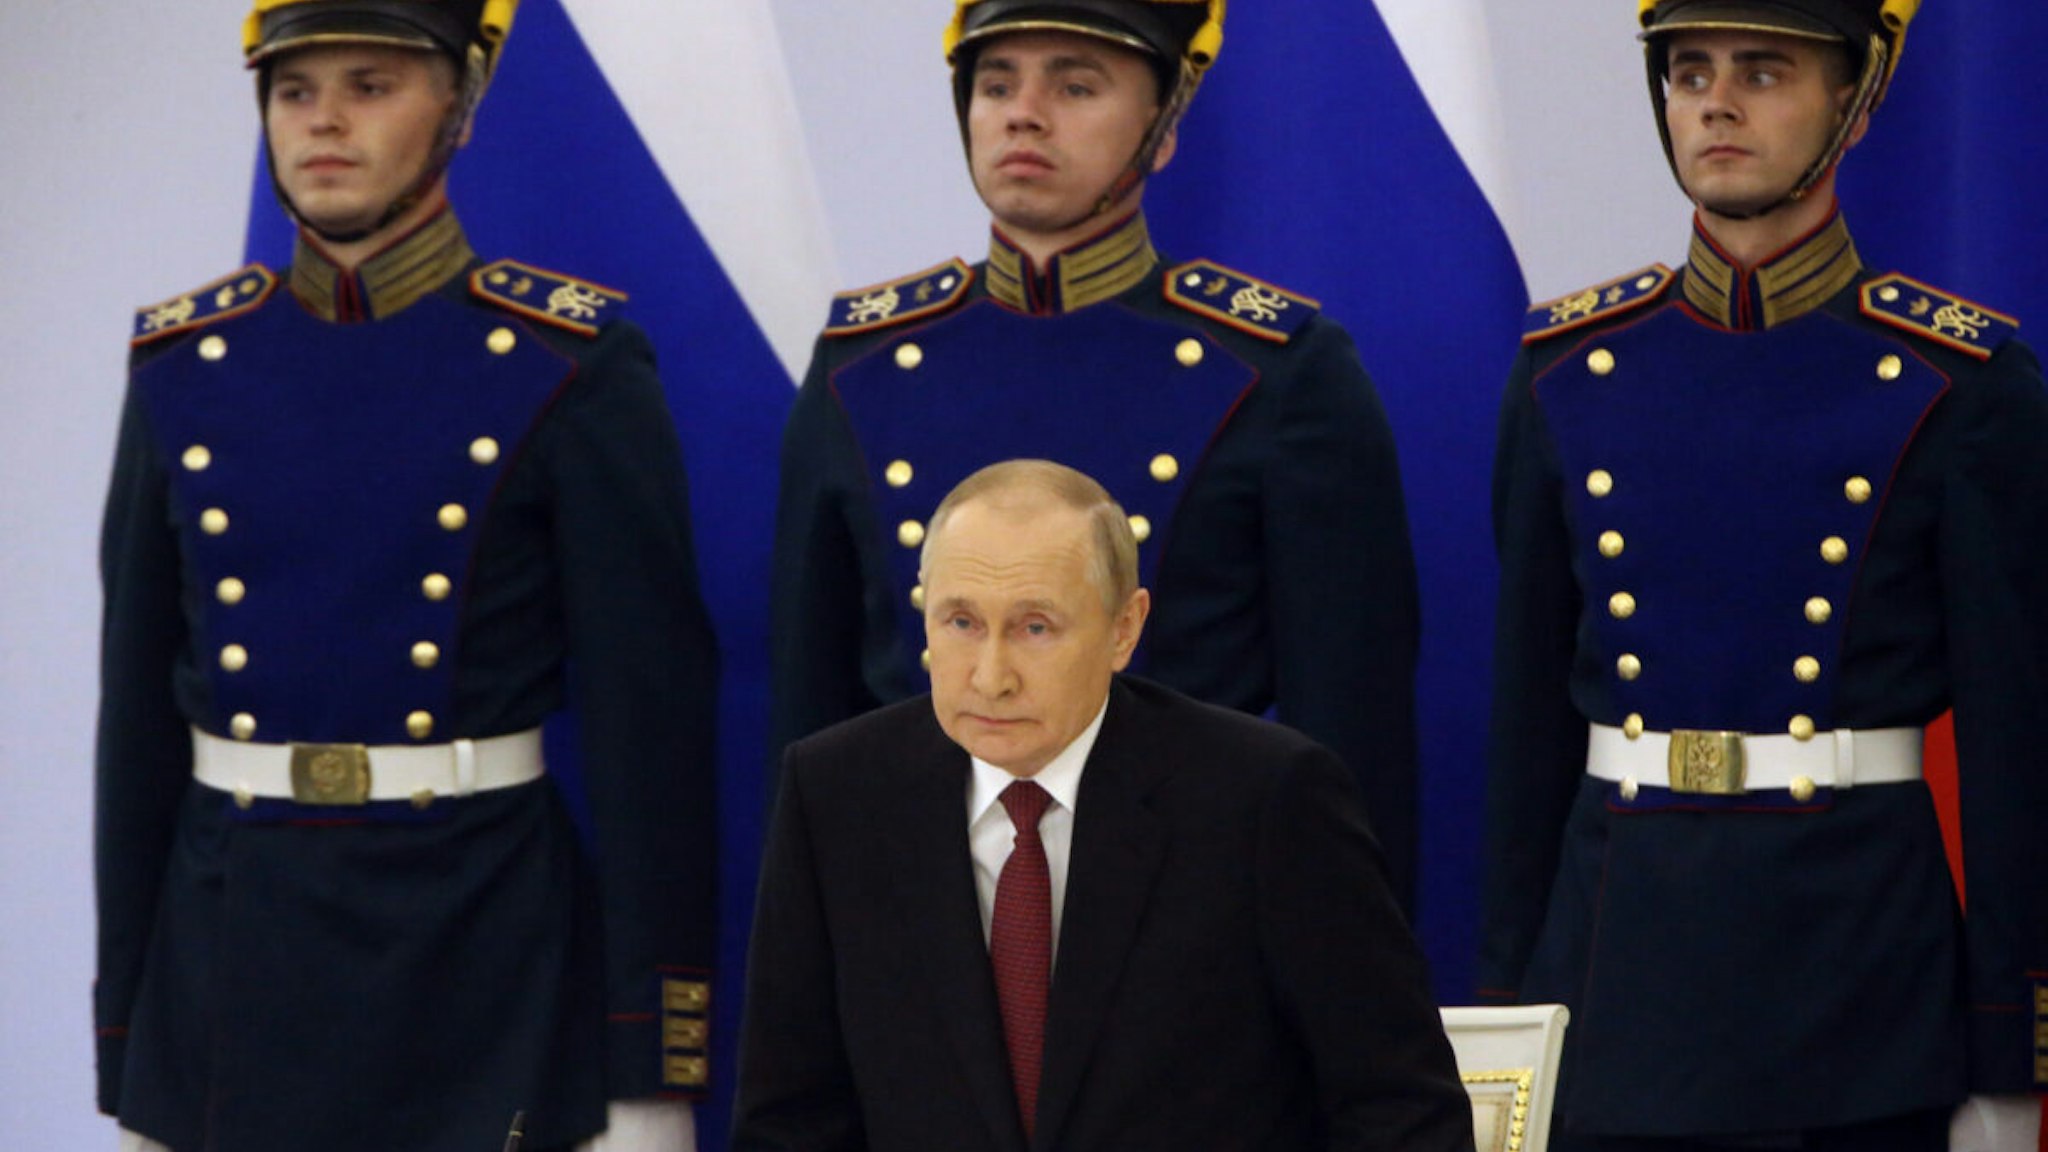 Russian President Vladimir Putin attends the signing ceremony with separatist leaders on the annexation of four Ukrainian regions at the Grand Kremlin Palace, September 30, 2022, in Moscow, Russia